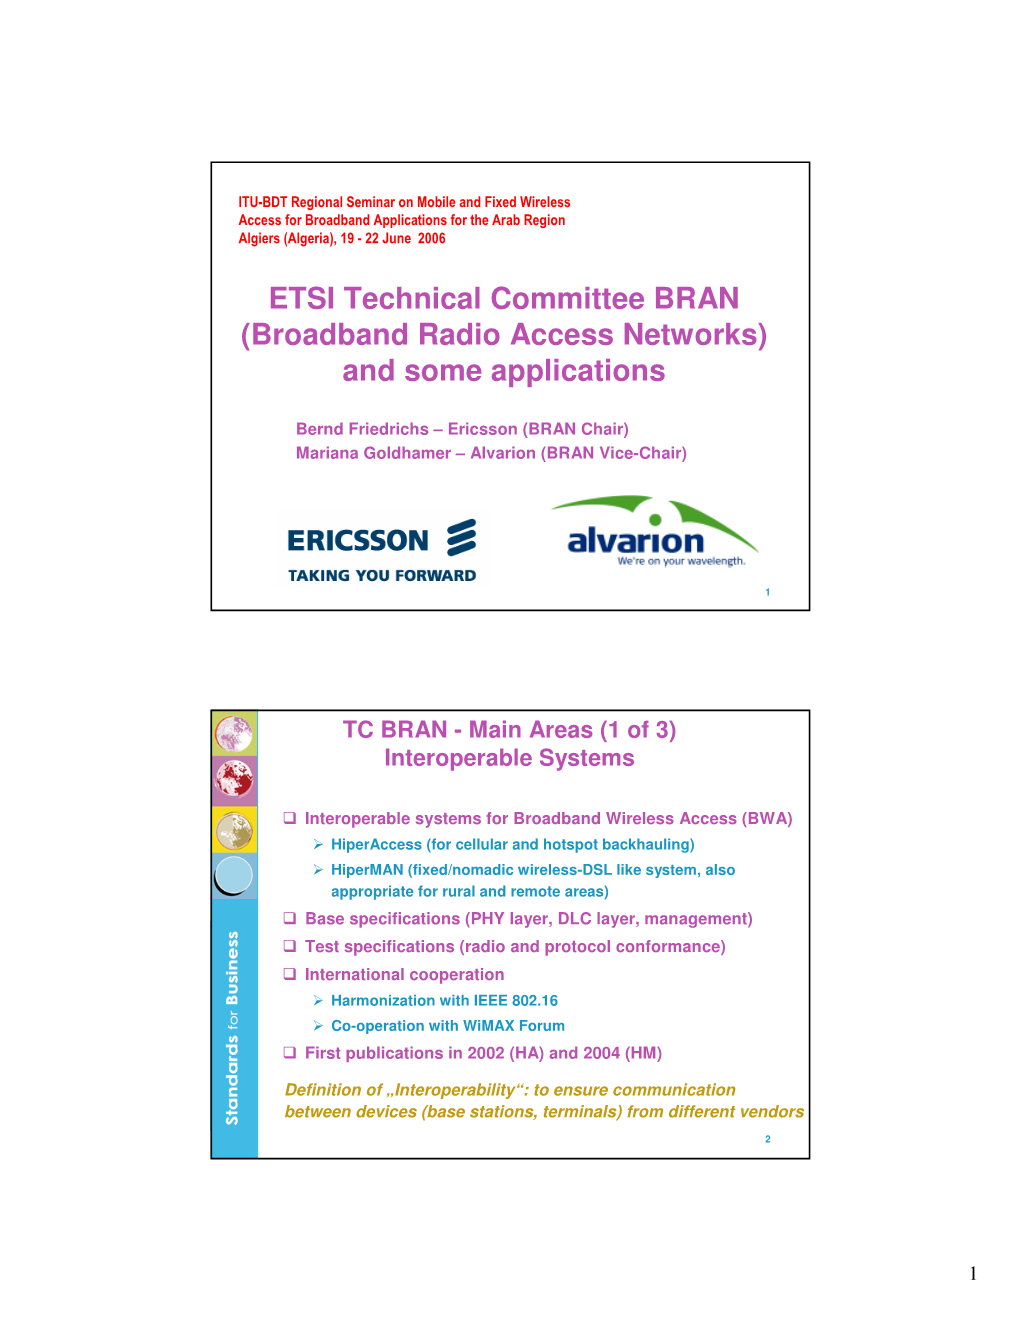 ETSI Technical Committee BRAN (Broadband Radio Access Networks) and Some Applications